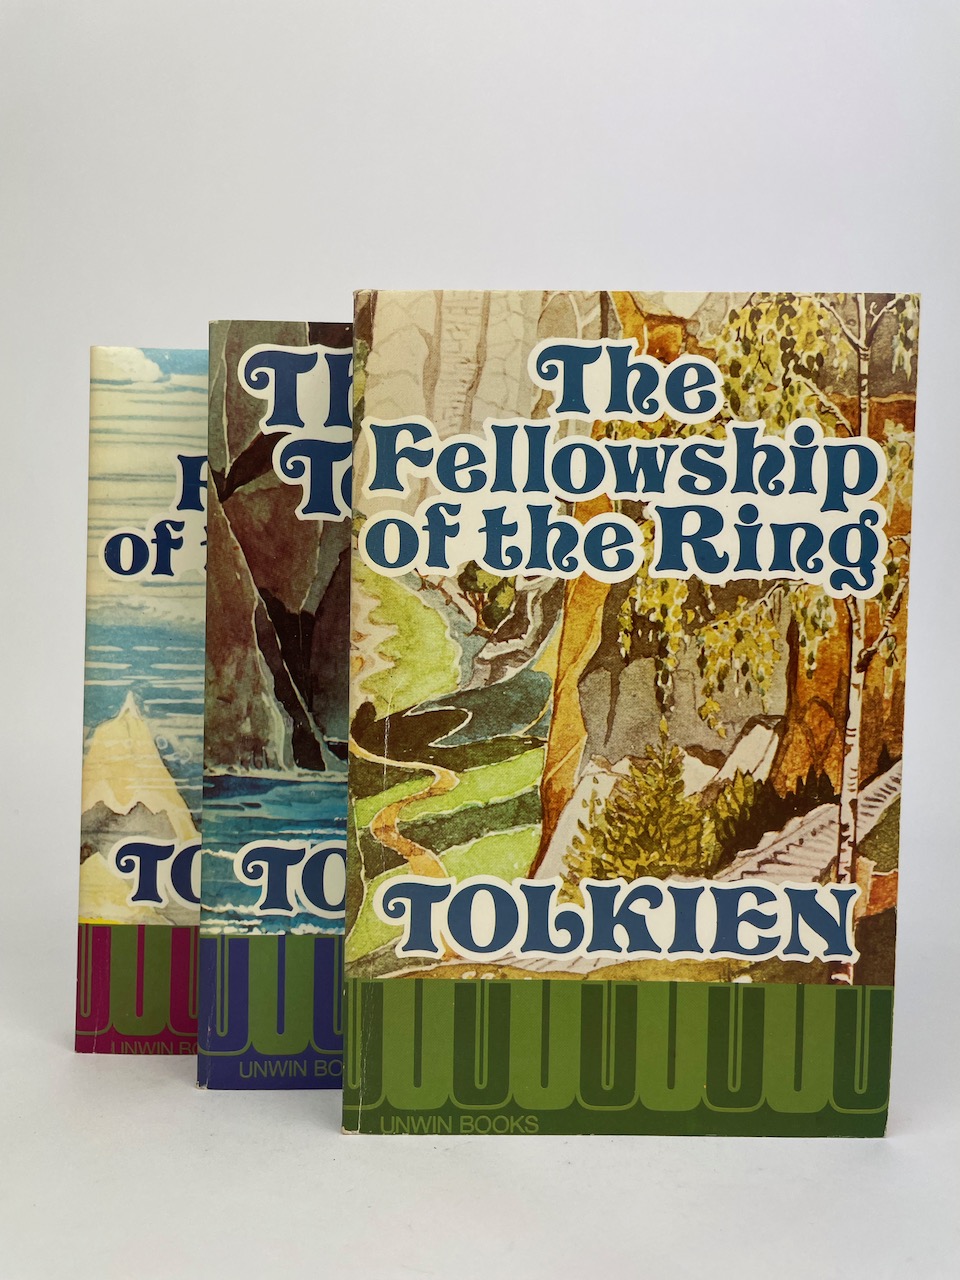 The Lord of the Rings with Tolkien art in sleeve from 1974, by Unwin Books 13